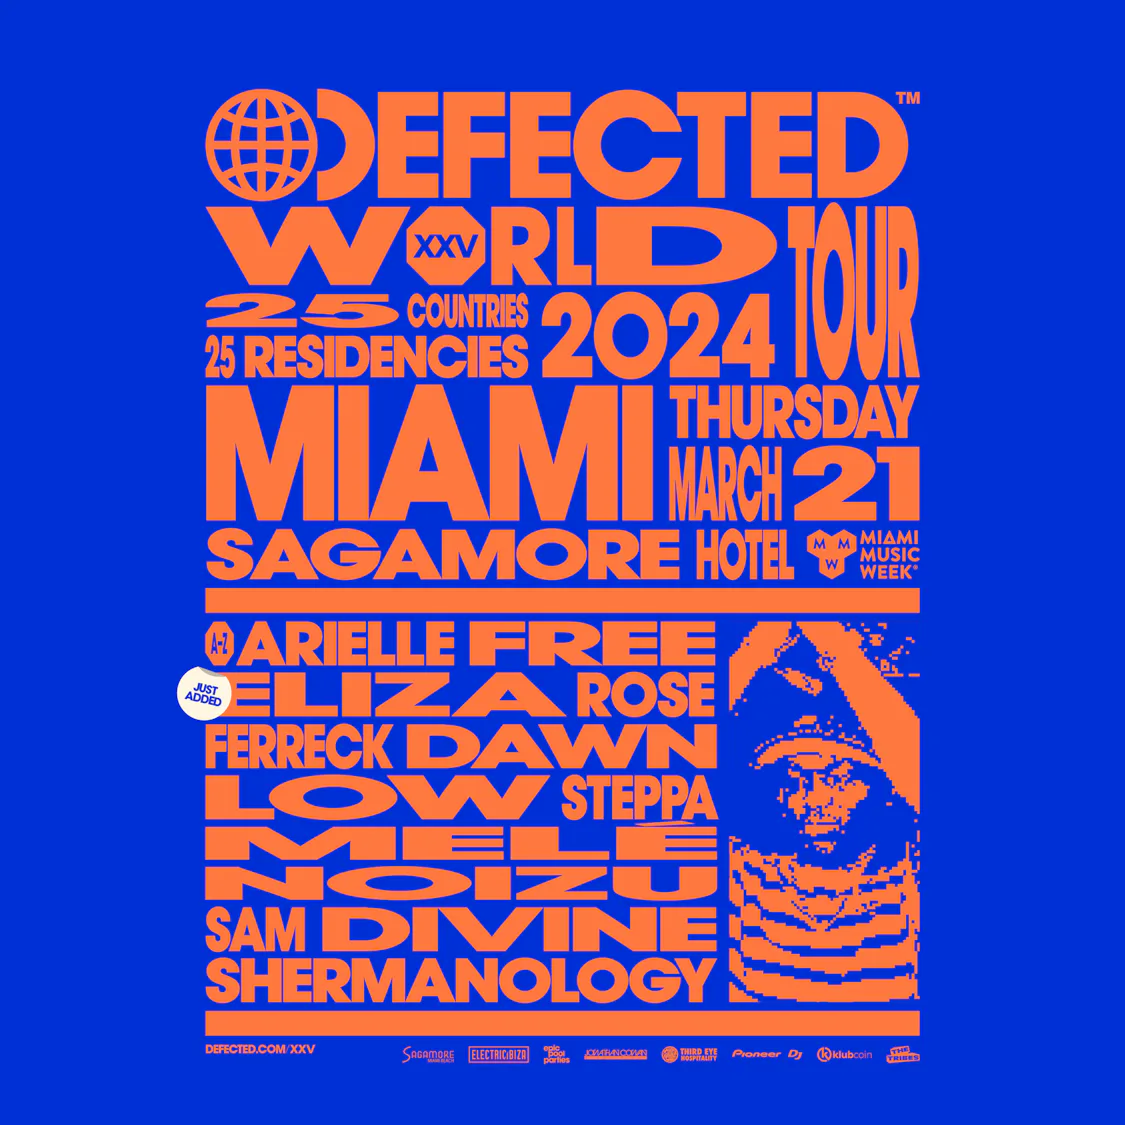 EPIC POOL PARTIES - DAY 2 - DEFECTED - MIAMI MUSIC WEEK